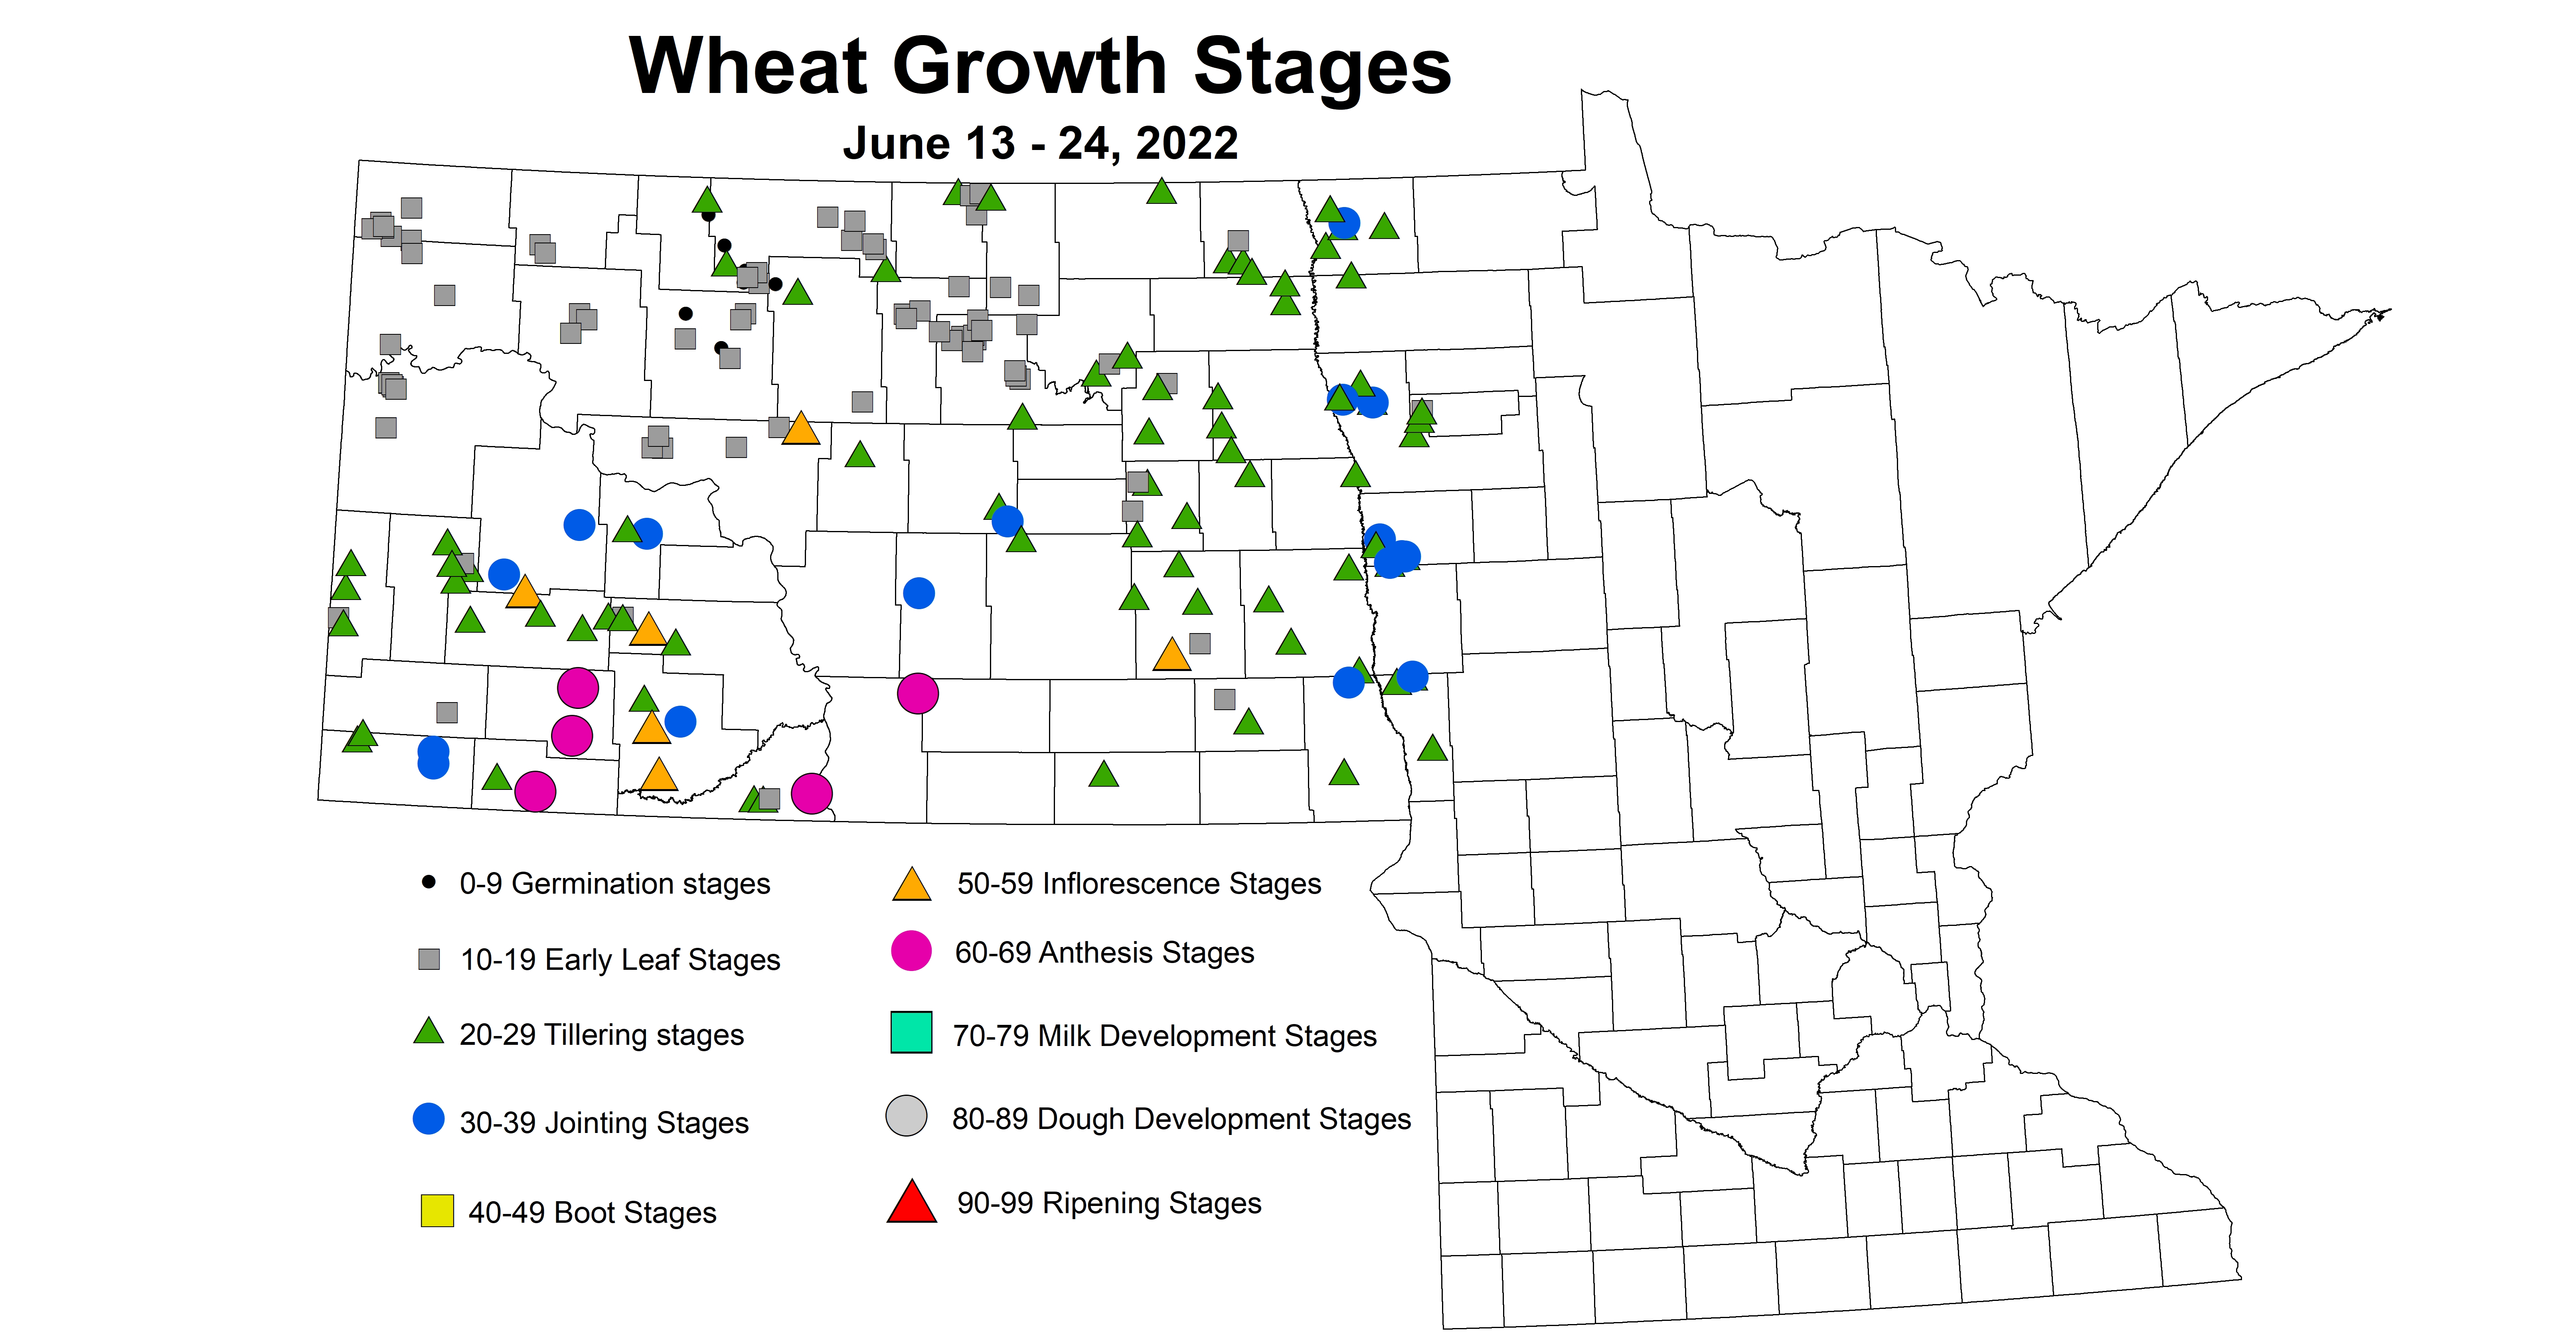 ND IPM map of wheat growth stages June 13-24, 2022